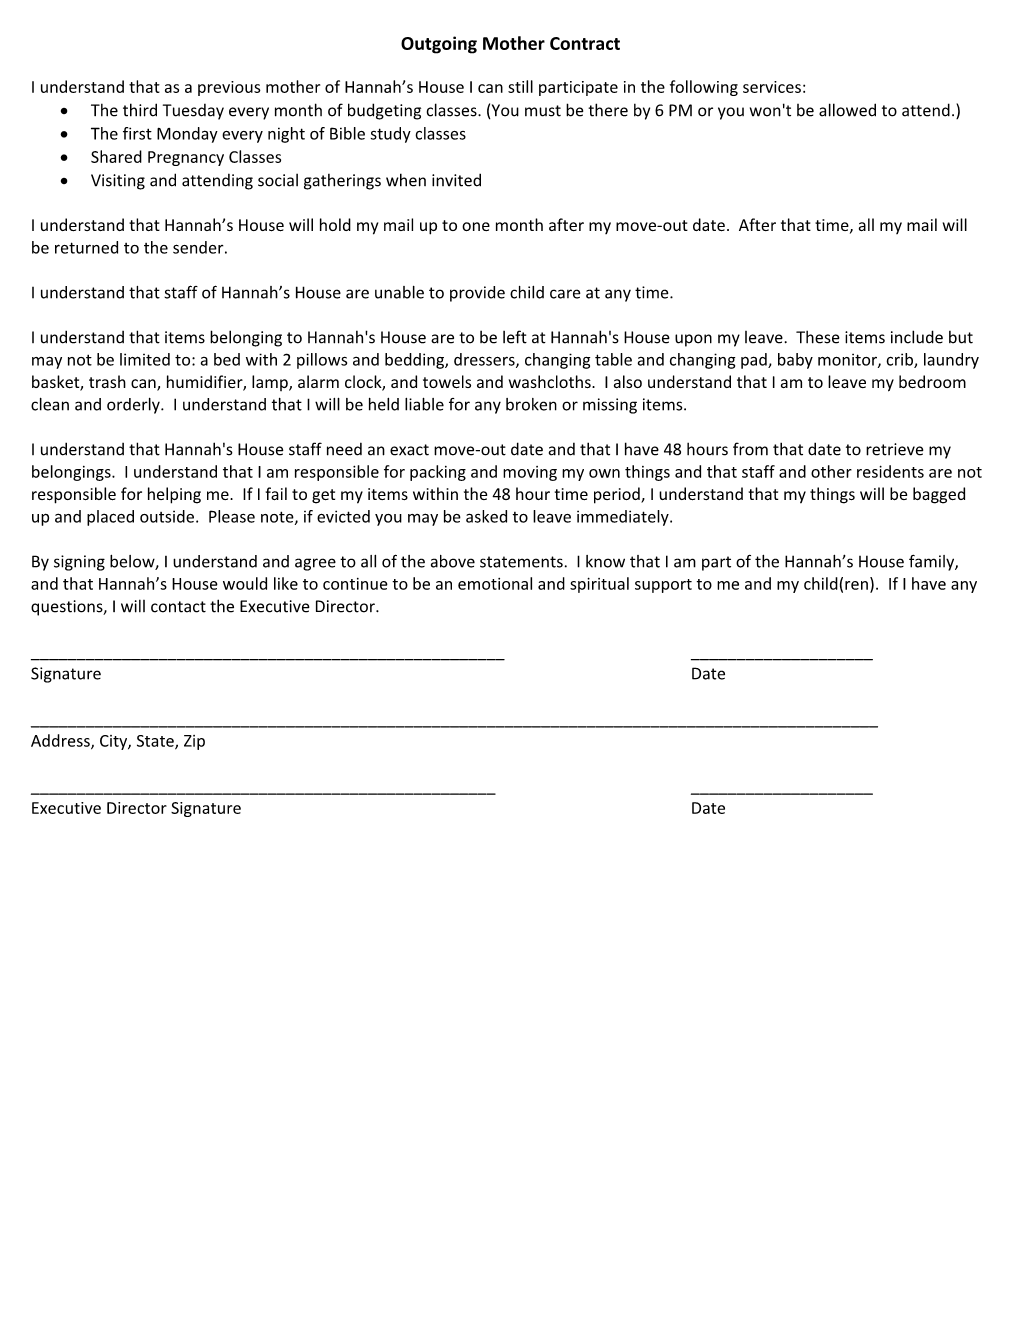 Outgoing Resident Contract